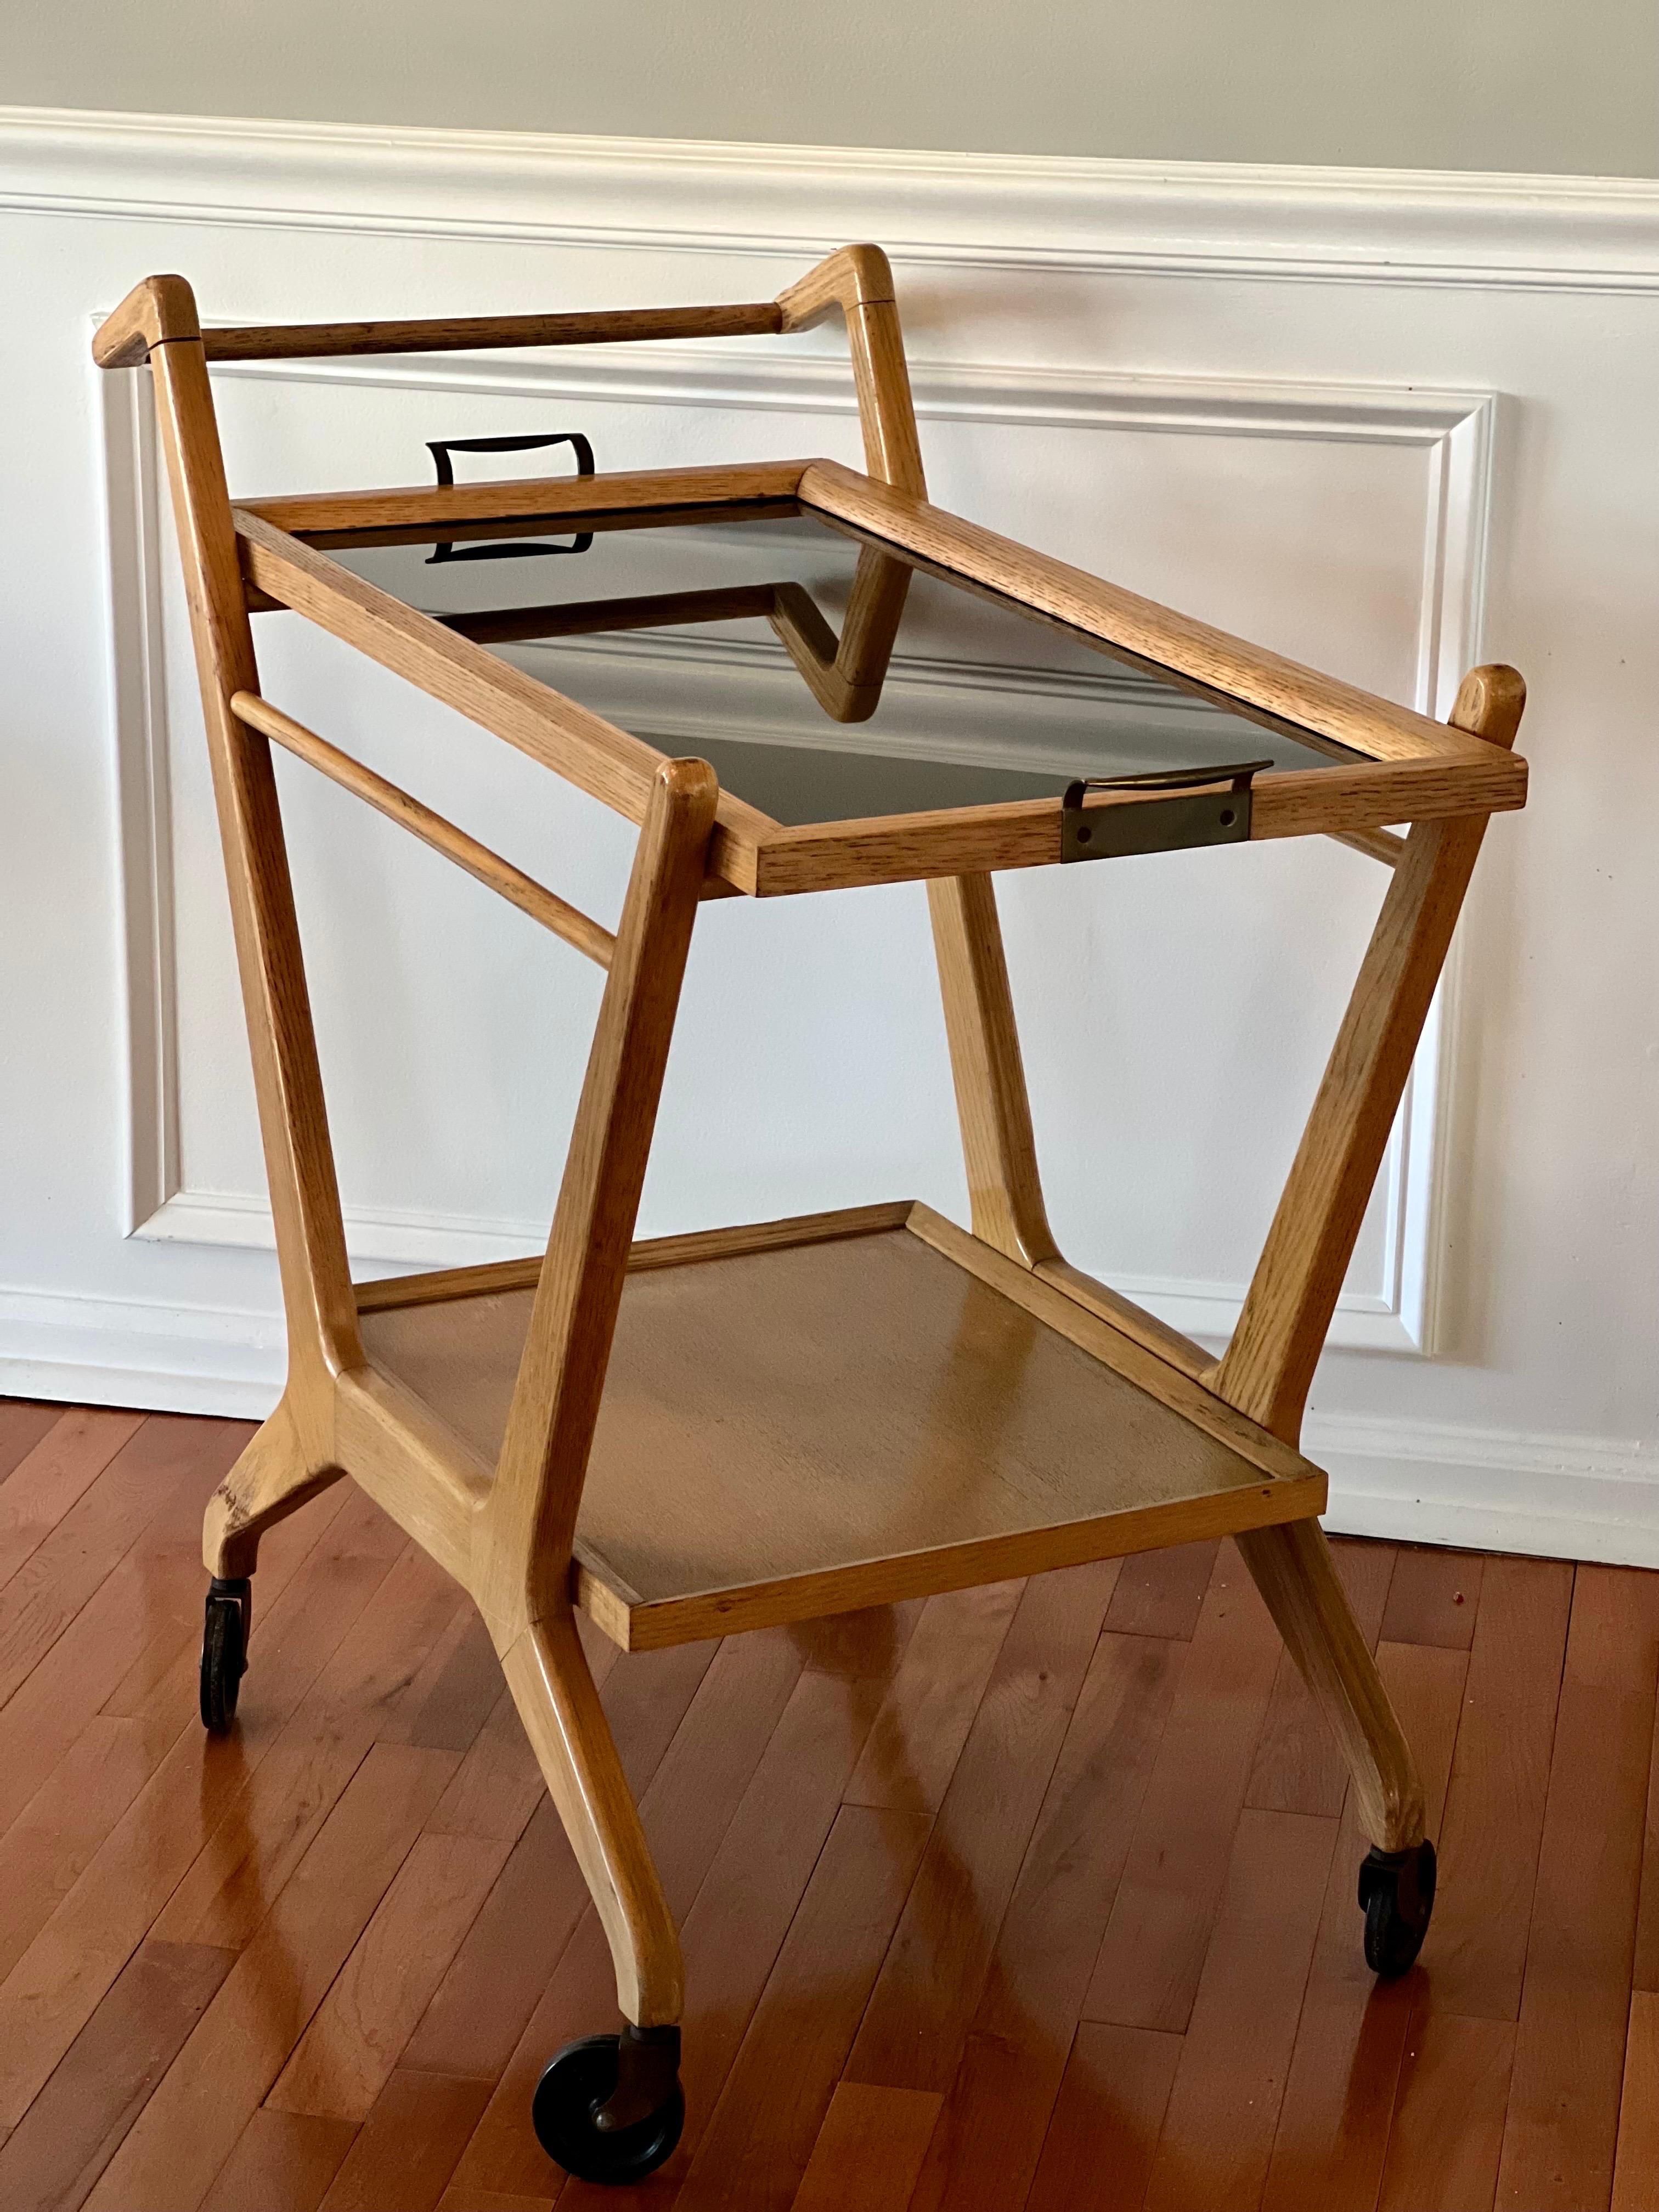 1950's Cesare Lacca golden oak bar cart for Cassina on casters. Original removable smoked glass tray is accented with brass handles. Beautiful and stylish Italian Mid Century design.